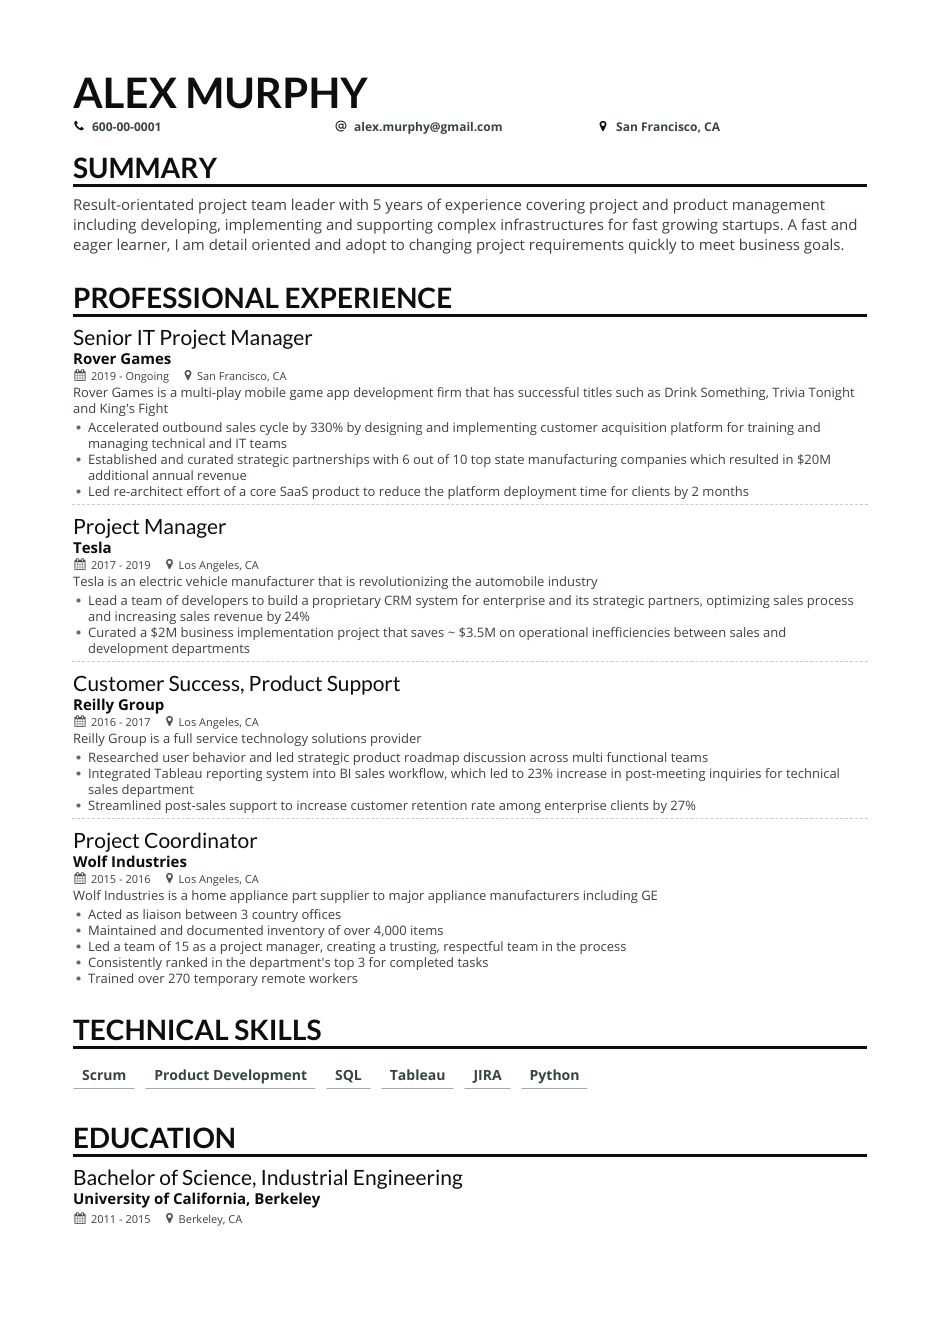 Management and Program Analyst Resume Samples 4 Job-winning Project Manager Resume Examples In 2021